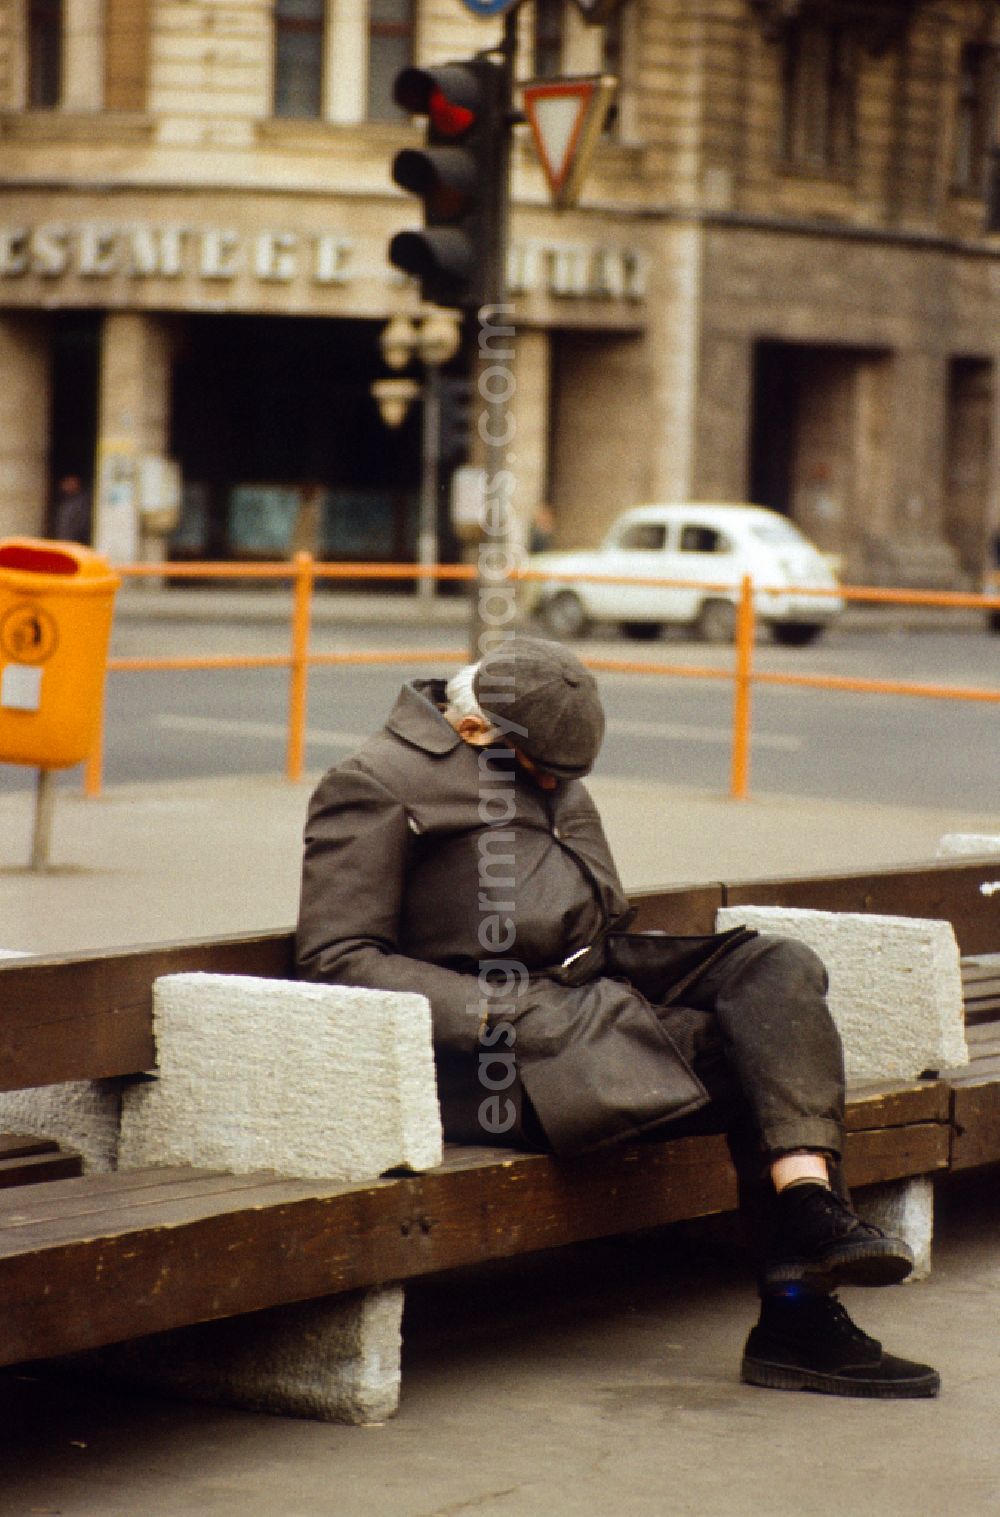 Berlin: Old man sleeping on a street bench in East Berlin on the territory of the former GDR, German Democratic Republic